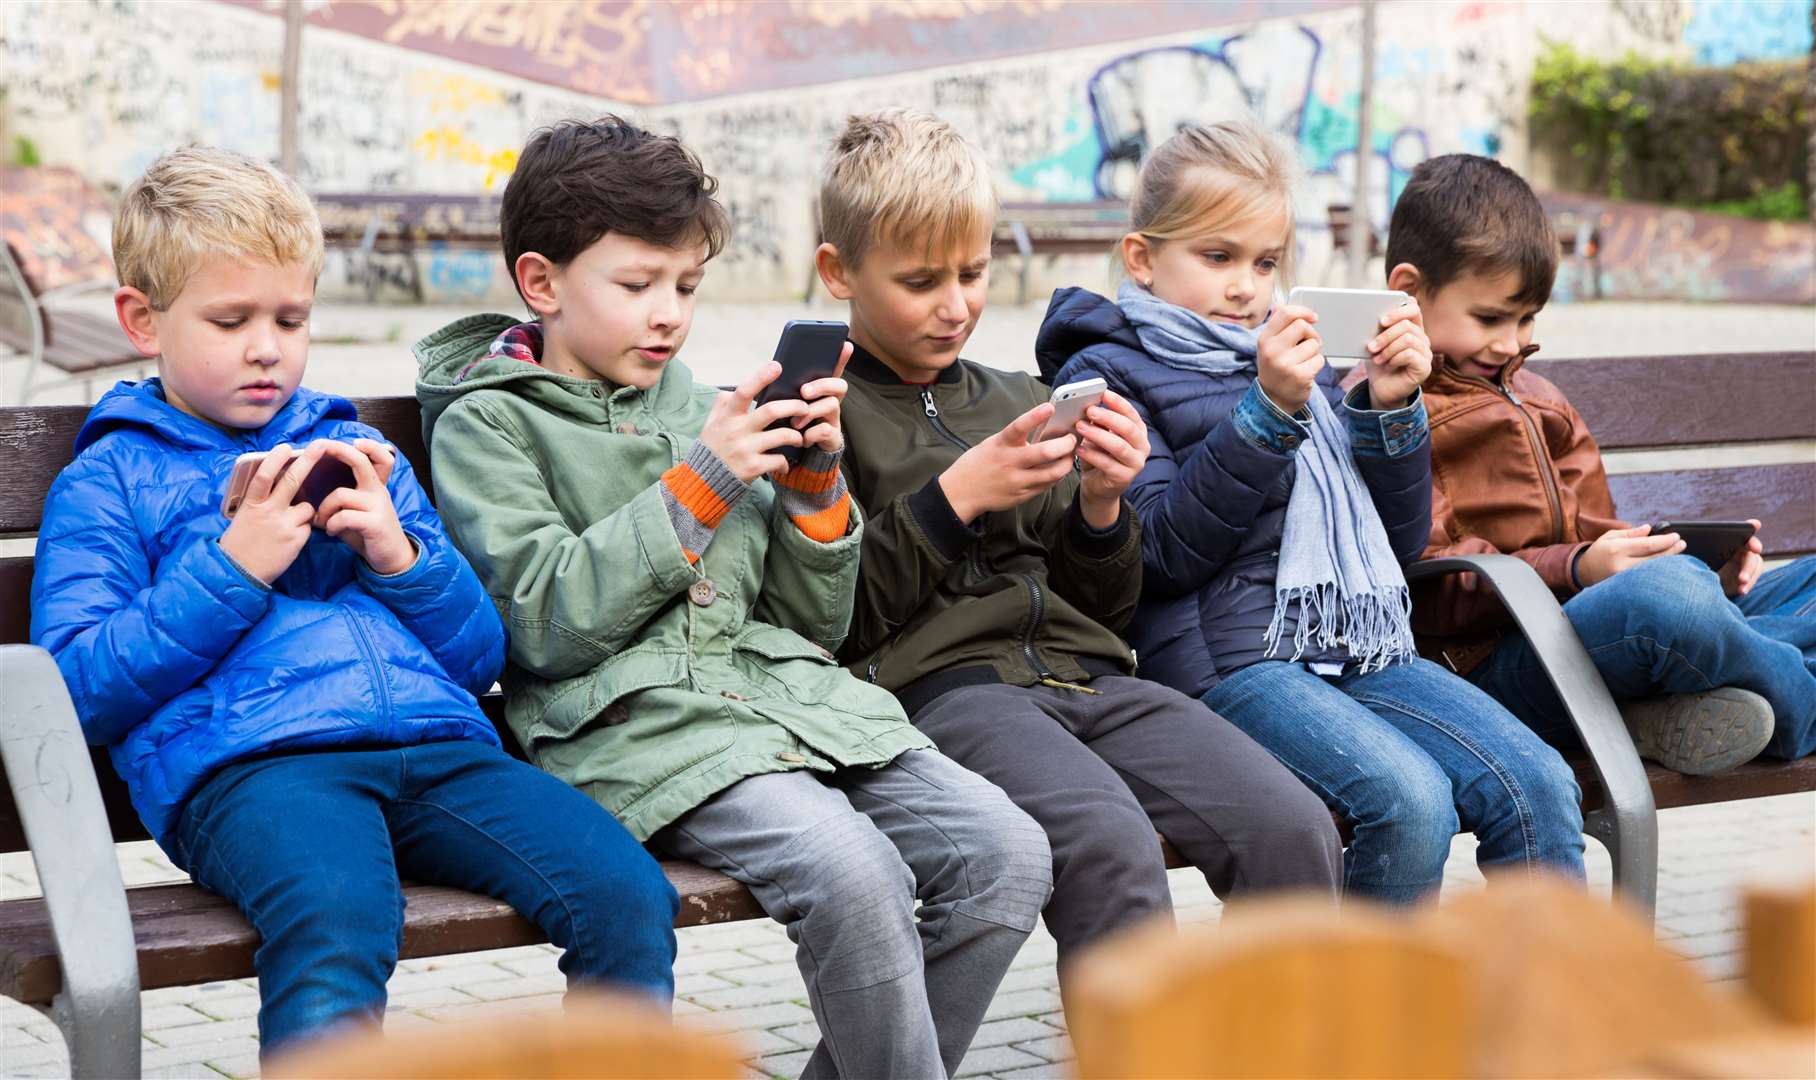 Youngsters are often too engrossed in their mobile phones to acknowledge a greeting.